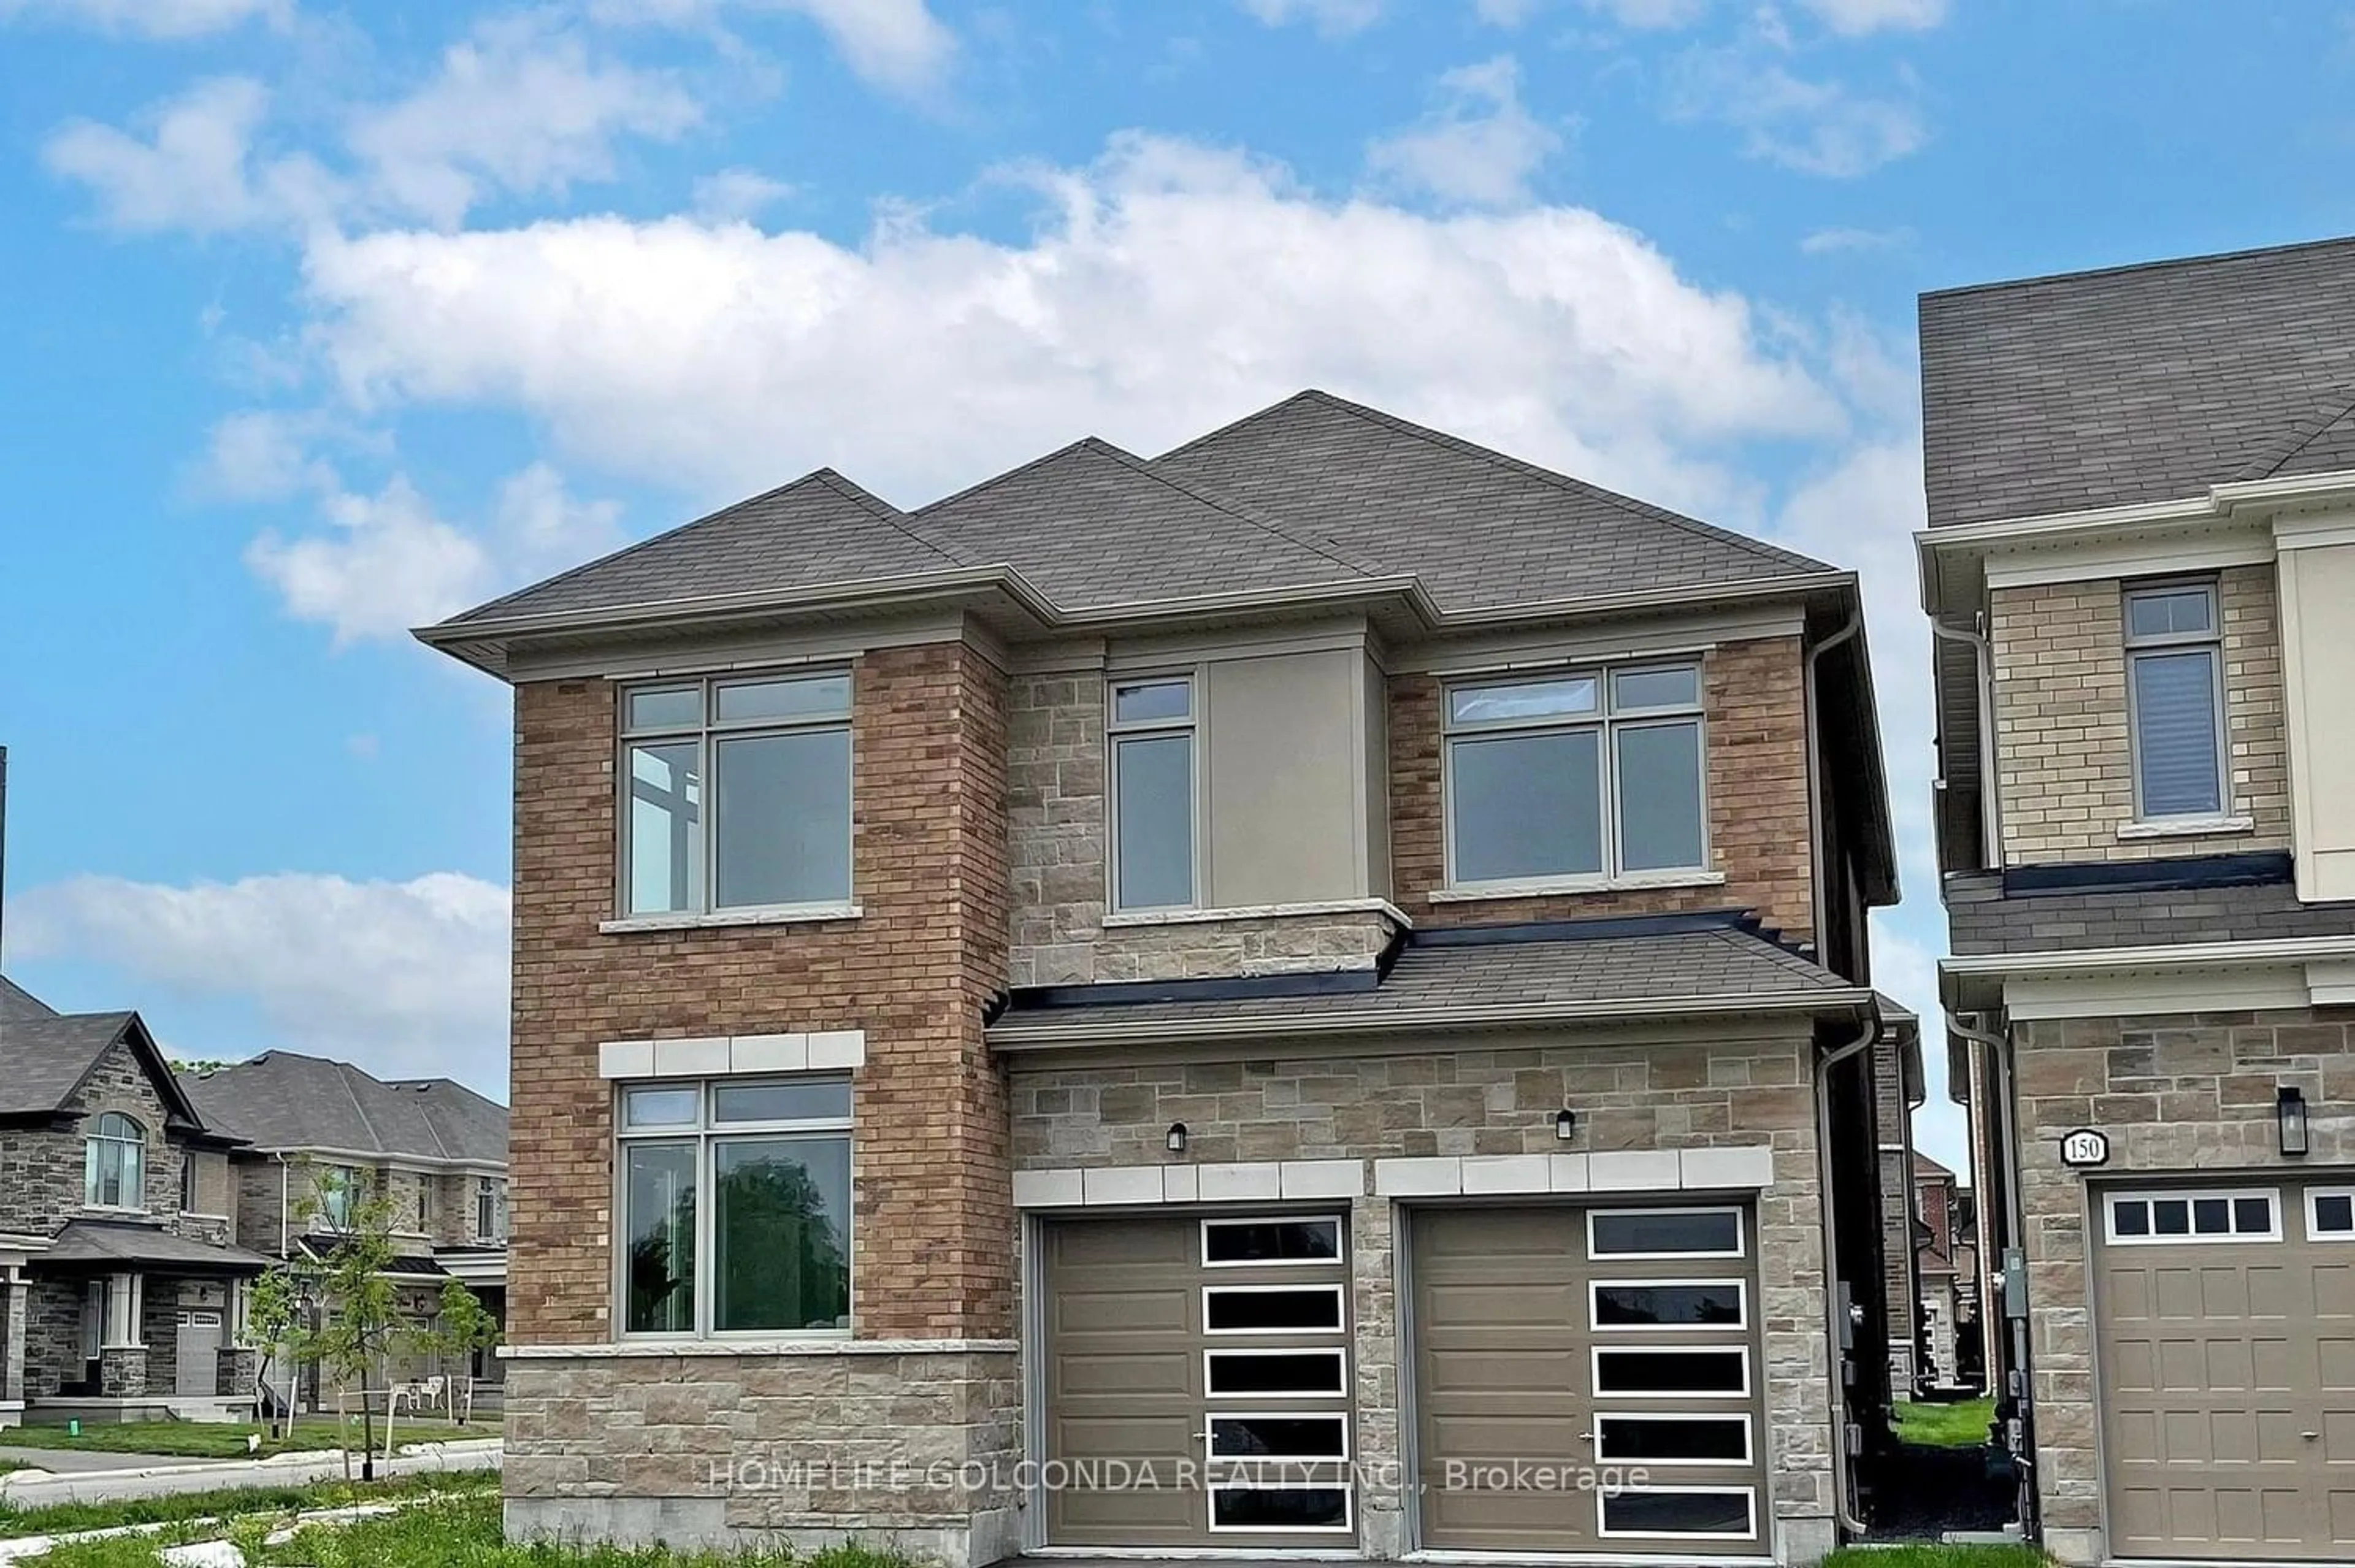 Home with brick exterior material for 164 Busato Dr, Whitchurch-Stouffville Ontario L4A 4X4